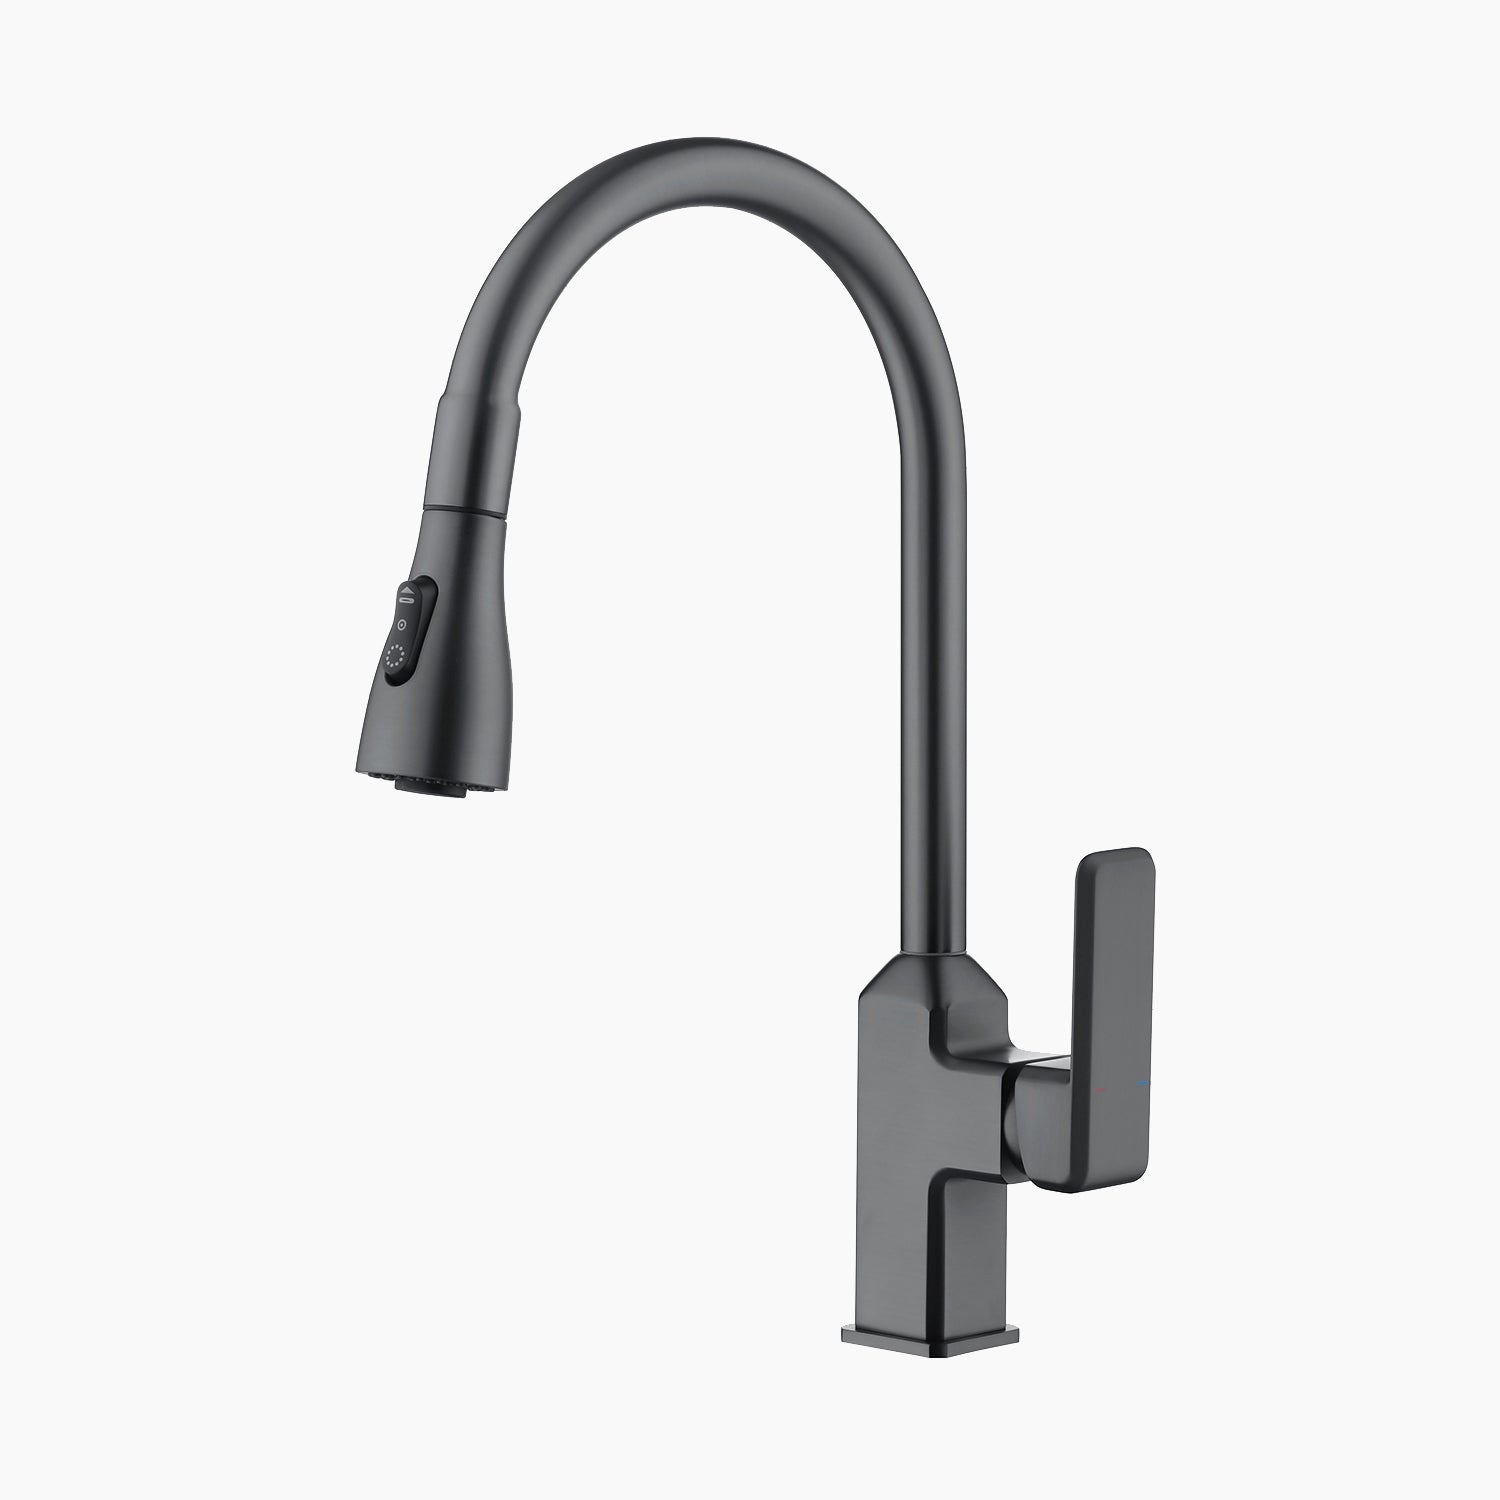 Lefton Copper stainless steel Kitchen Pull-Down Faucet